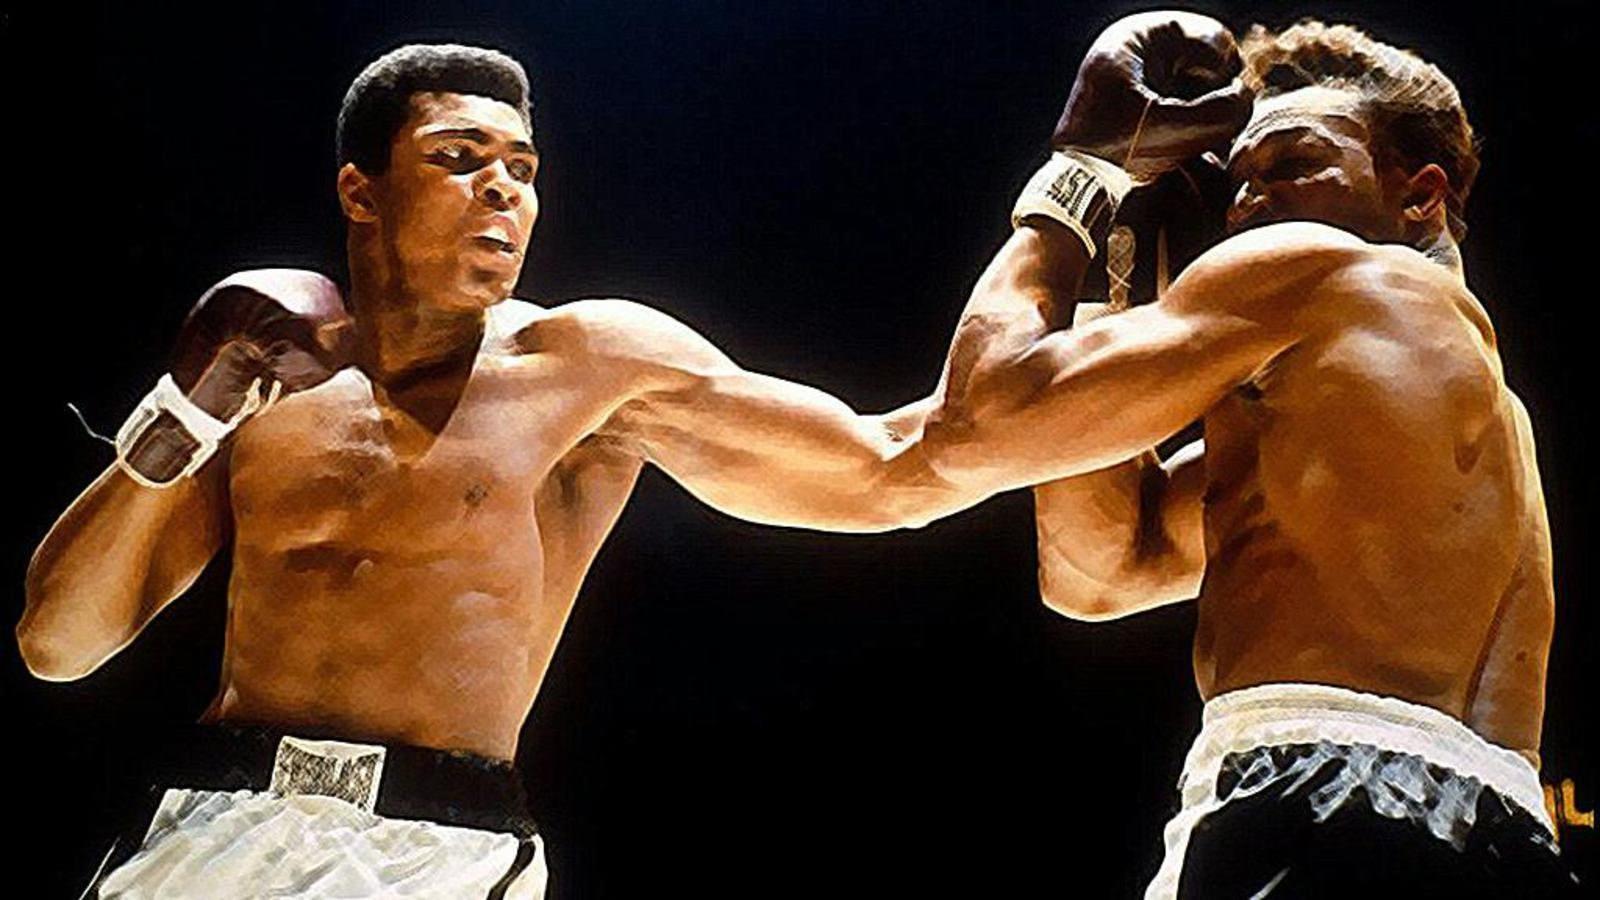 Awesome Muhammad Ali free background for HD 1600x900 desktop